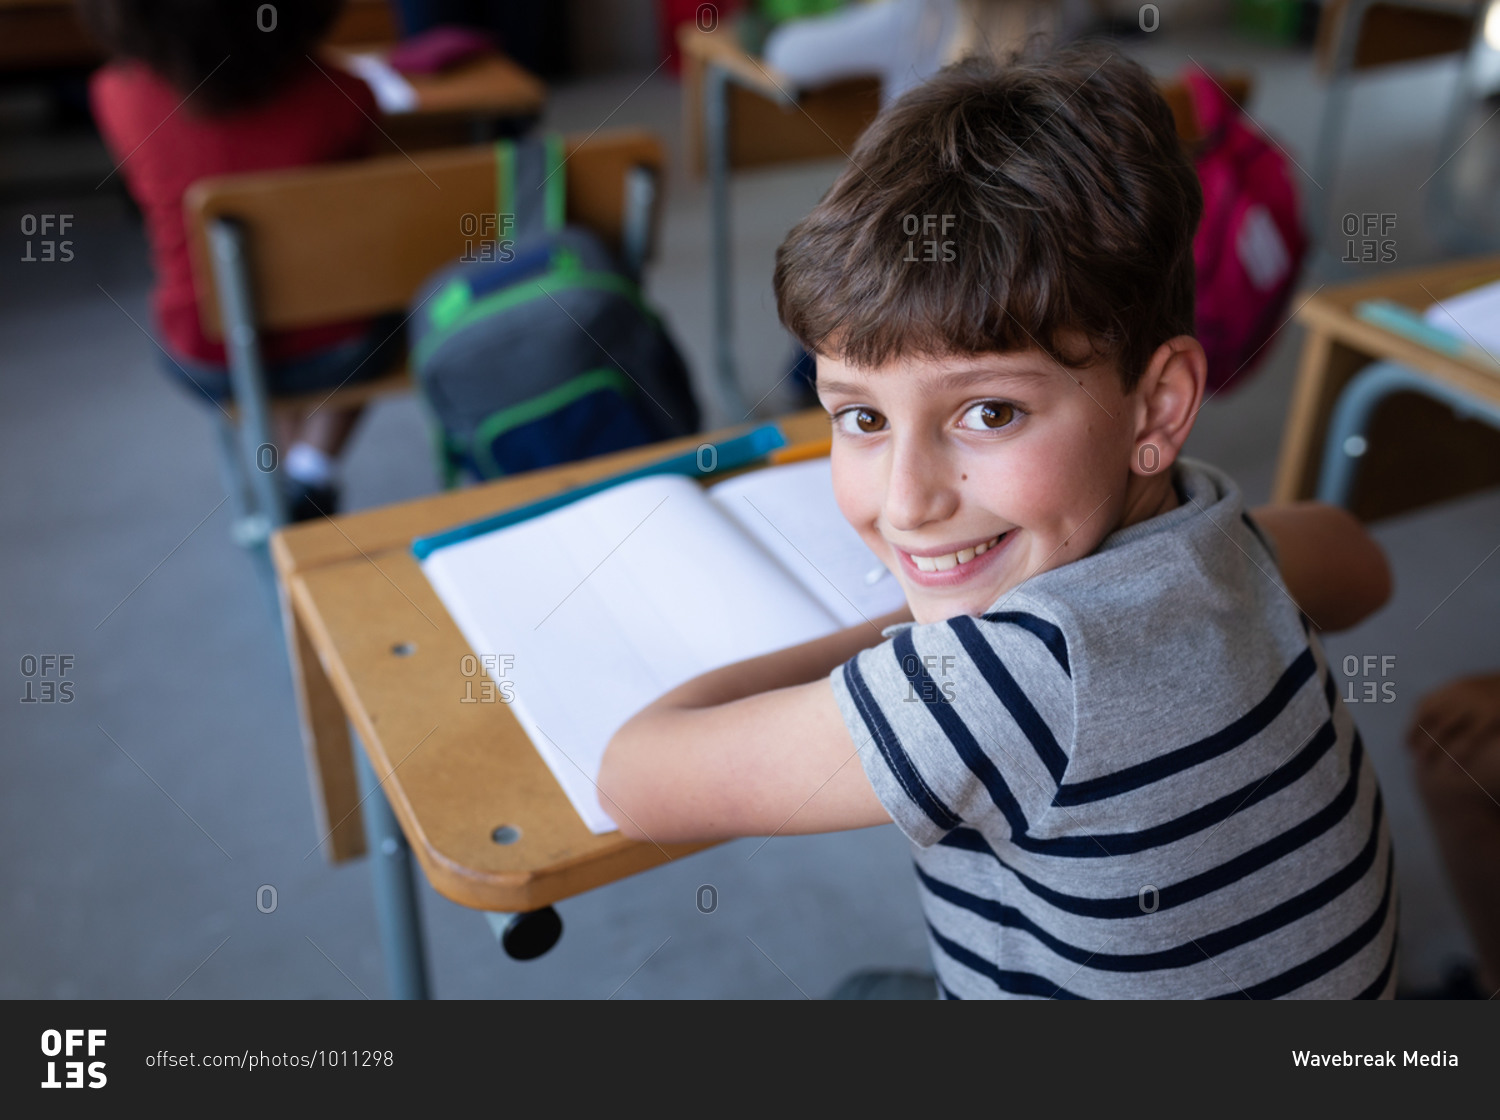 Portrait of a Caucasian boy smiling while sitting on his desk at school. Primary education social distancing health safety during Covid19 Coronavirus pandemic.